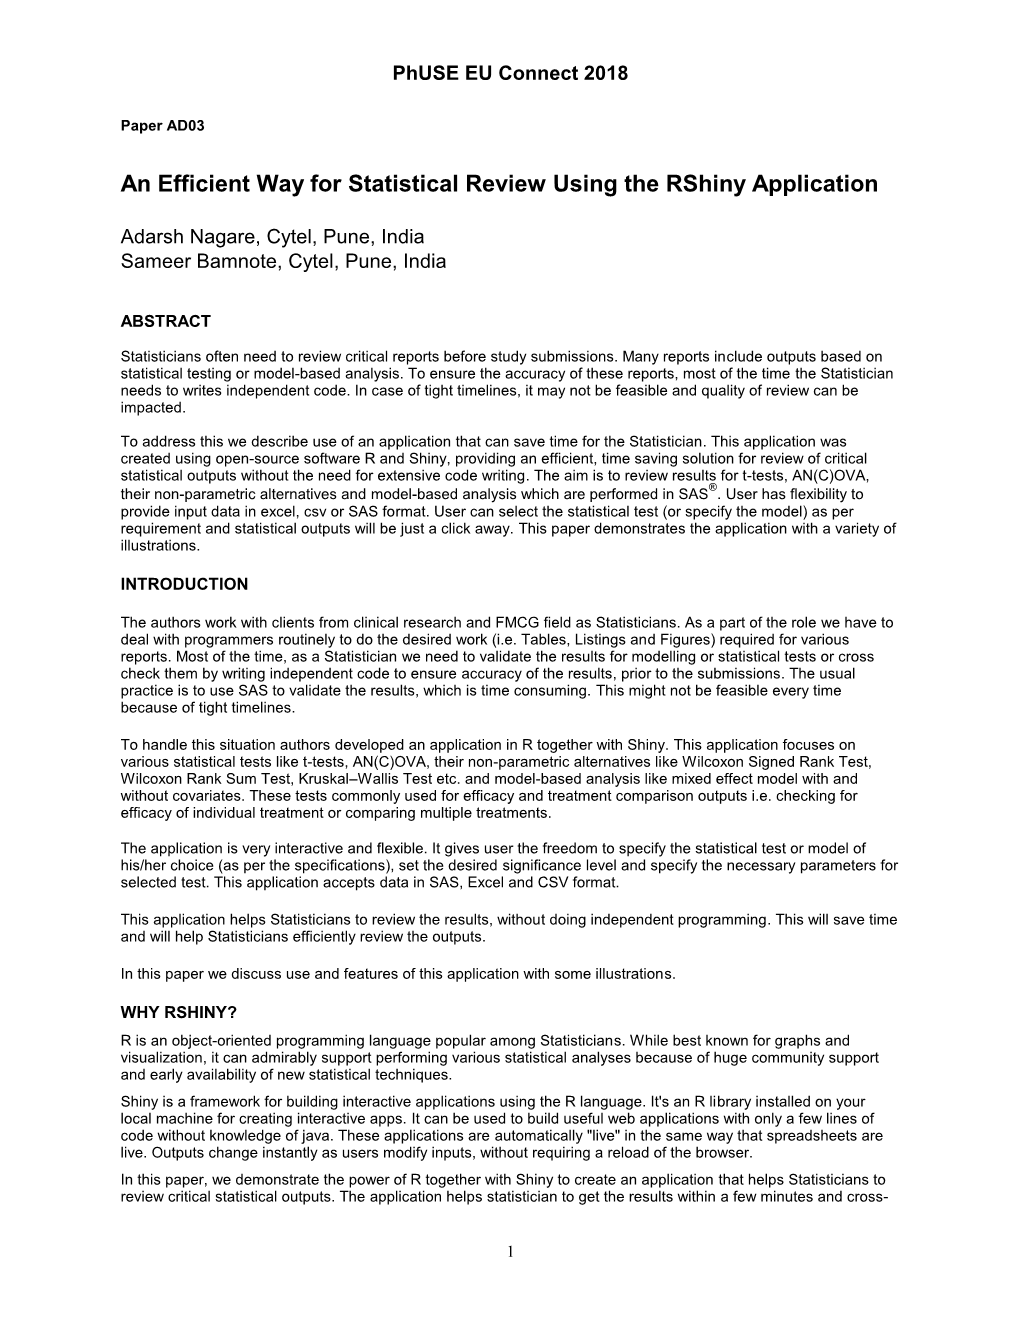 An Efficient Way for Statistical Review Using the Rshiny Application